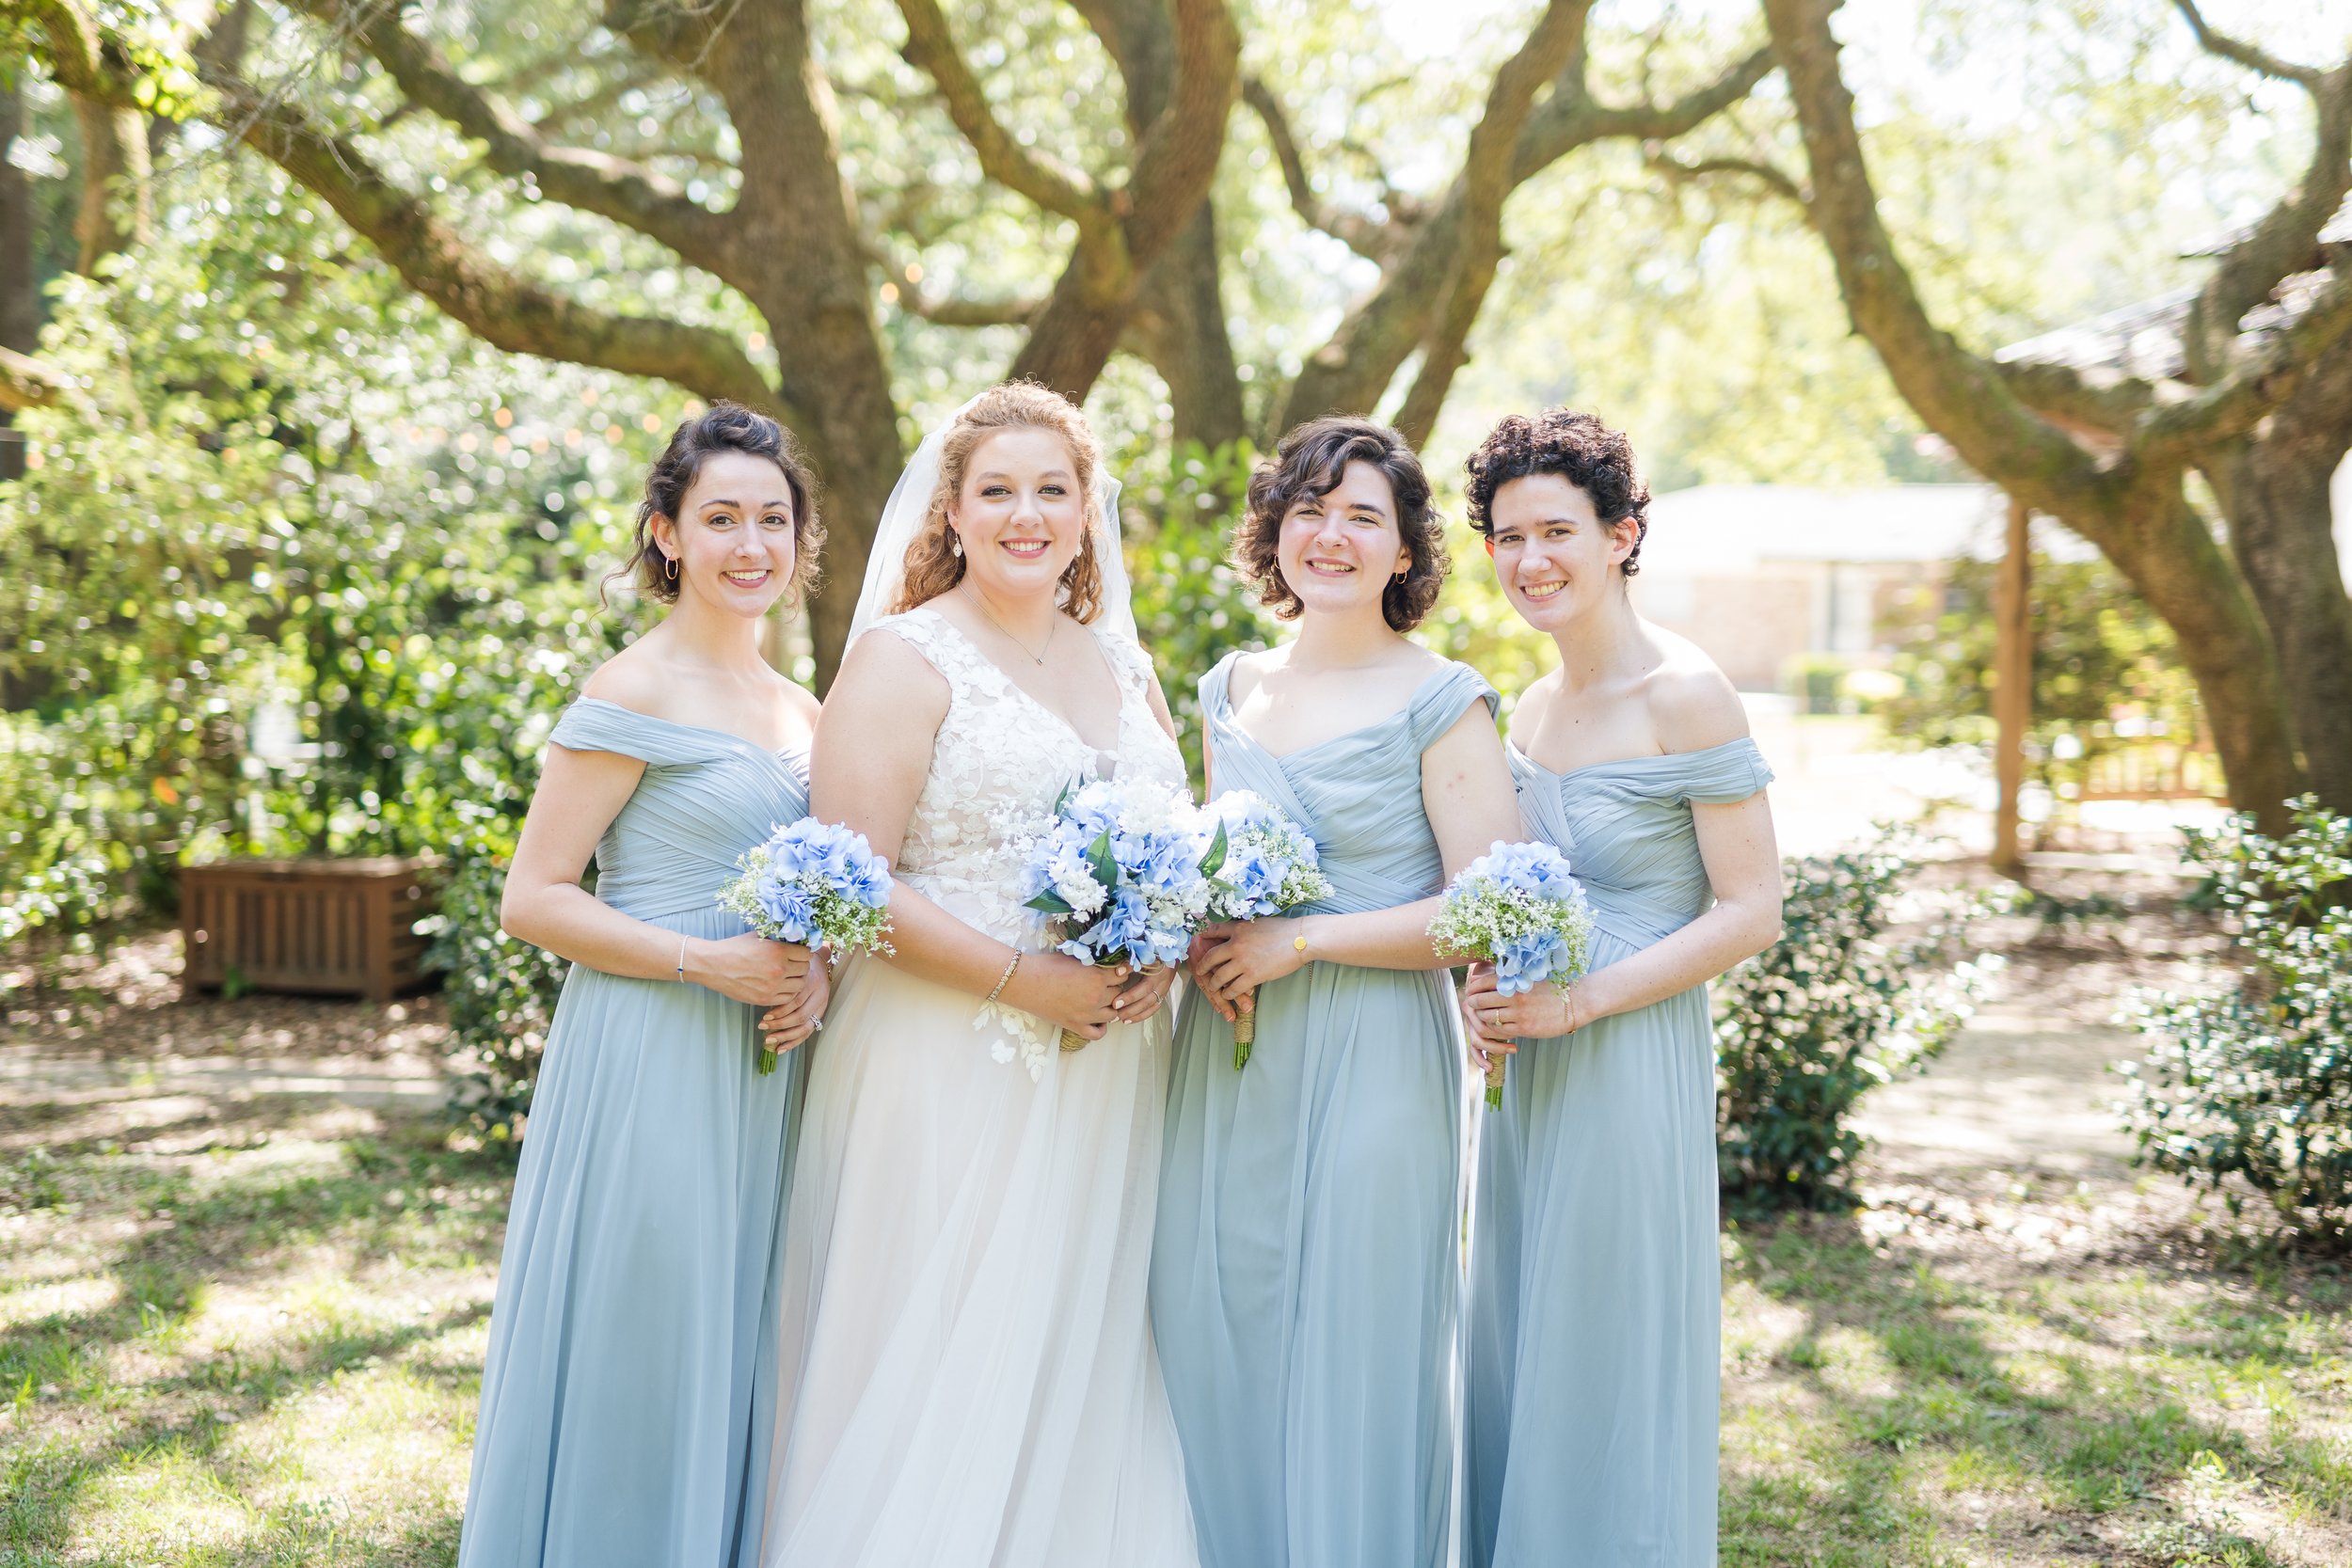 The venue at dawes summer wedding in mobile alabama wedding photography photographed by kristen marcus photography | alabama wedding photographer